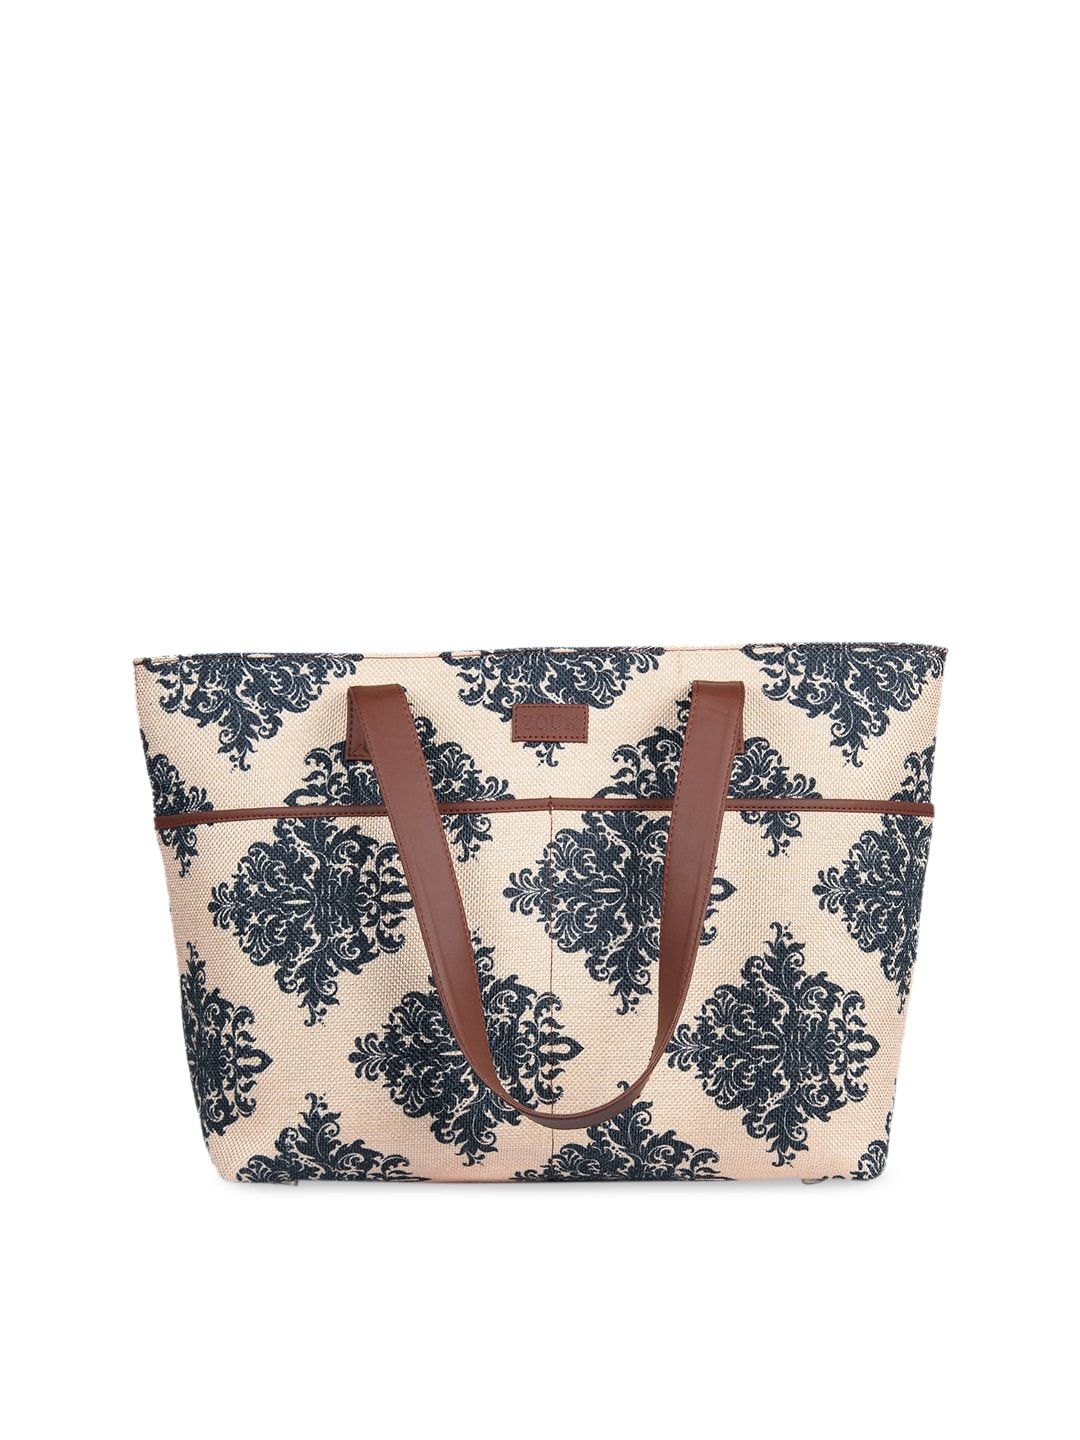 ZOUK Beige Embellished Sustainable Tote Bag Price in India